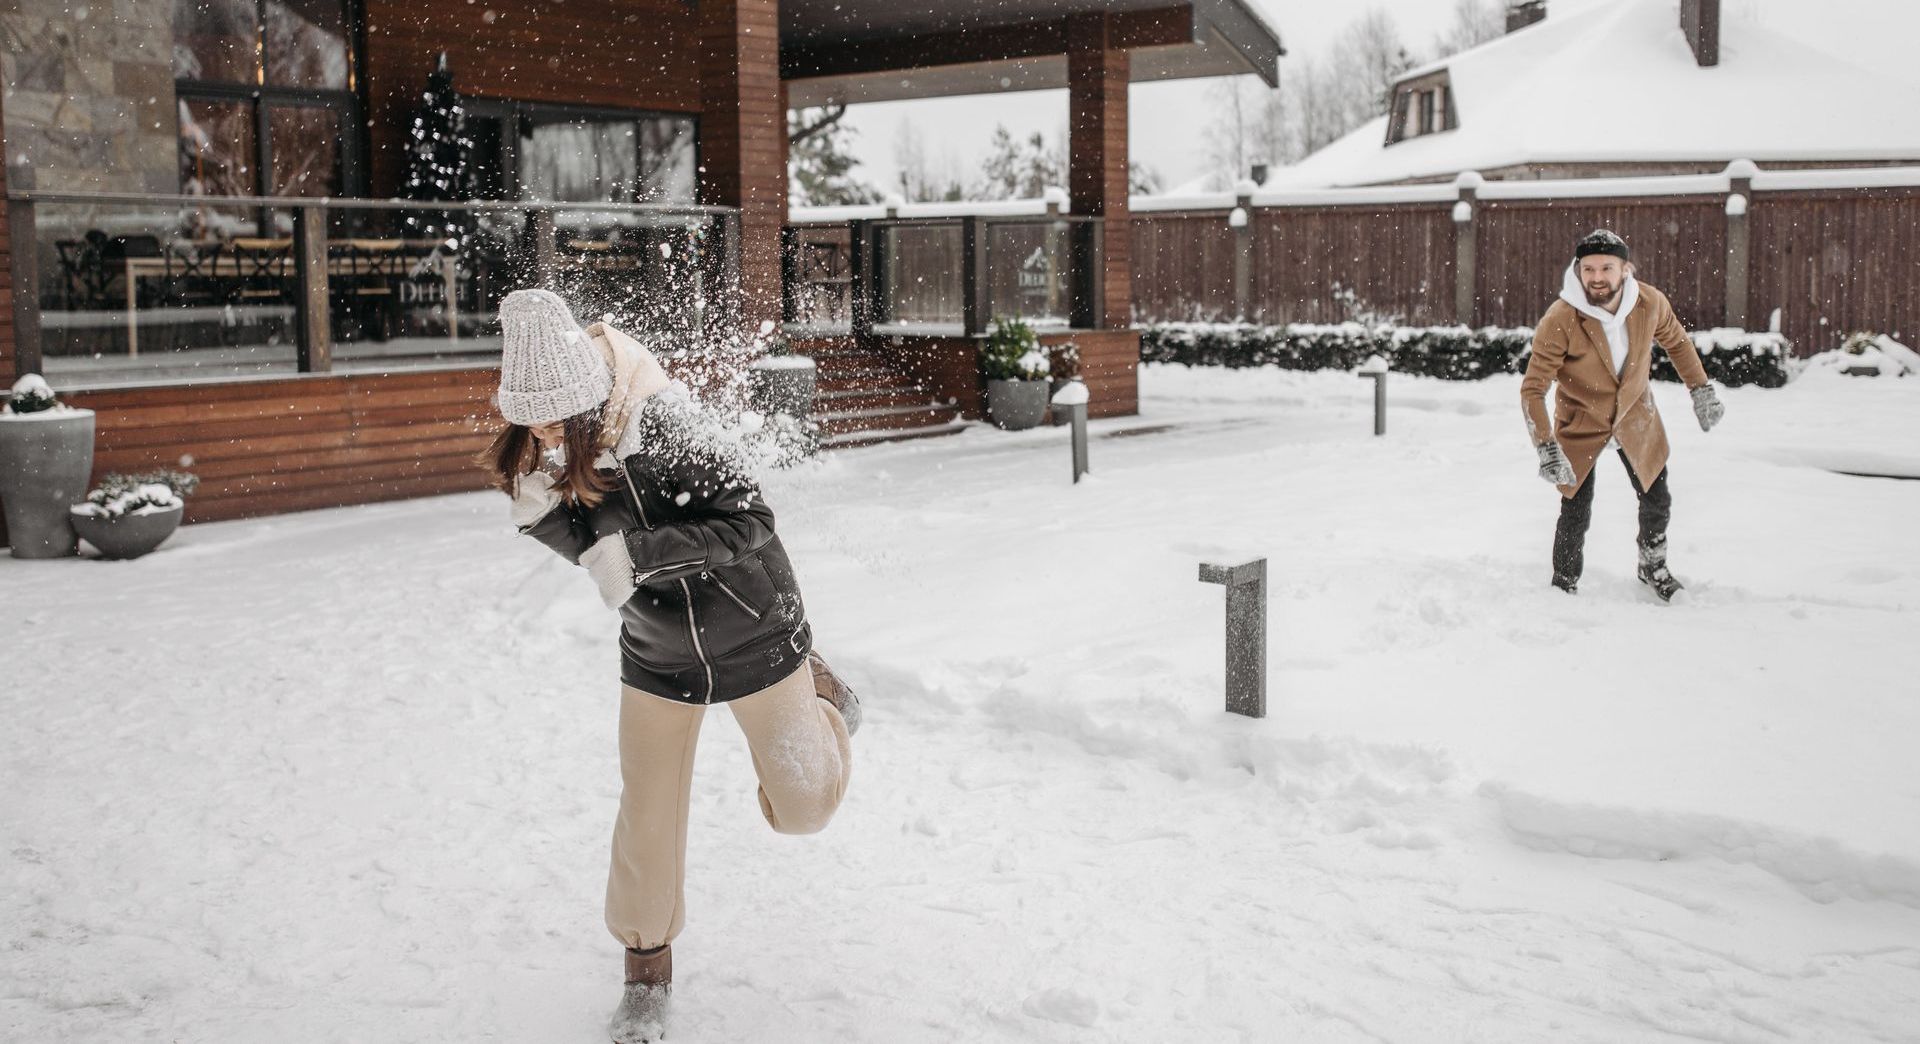 man and woman having snowball fight